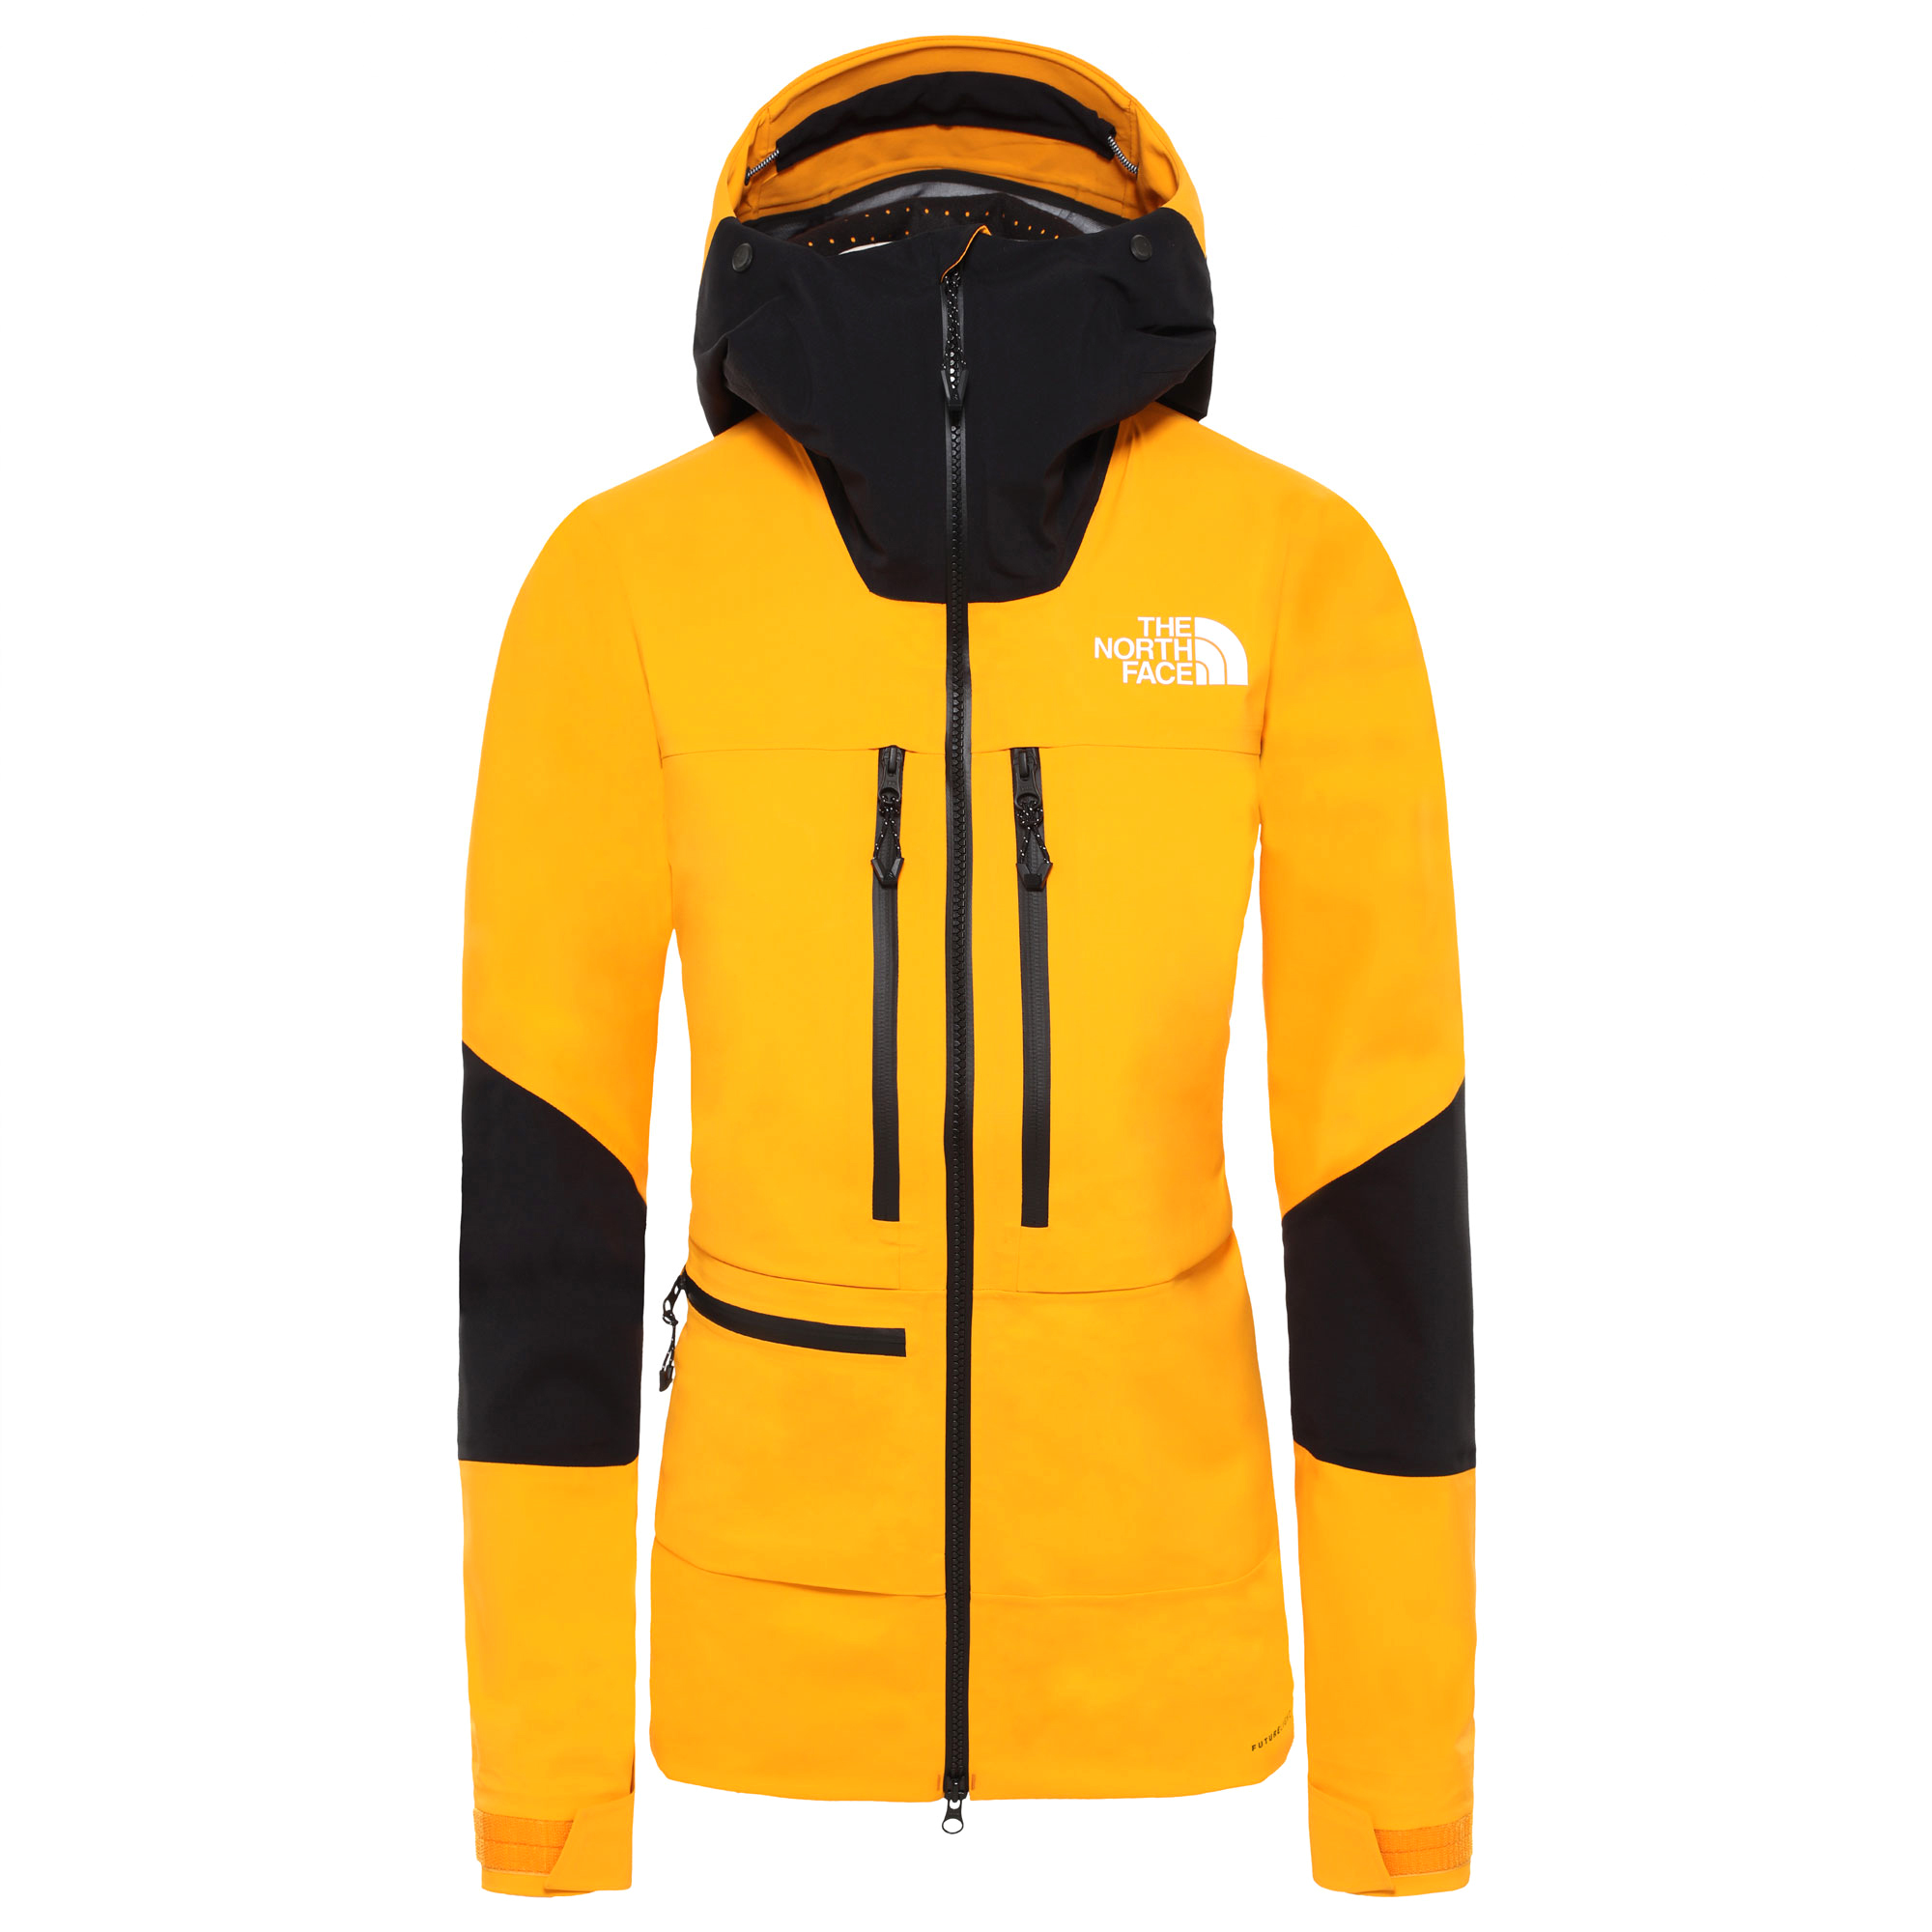 The North Face Summit L5 Jacket